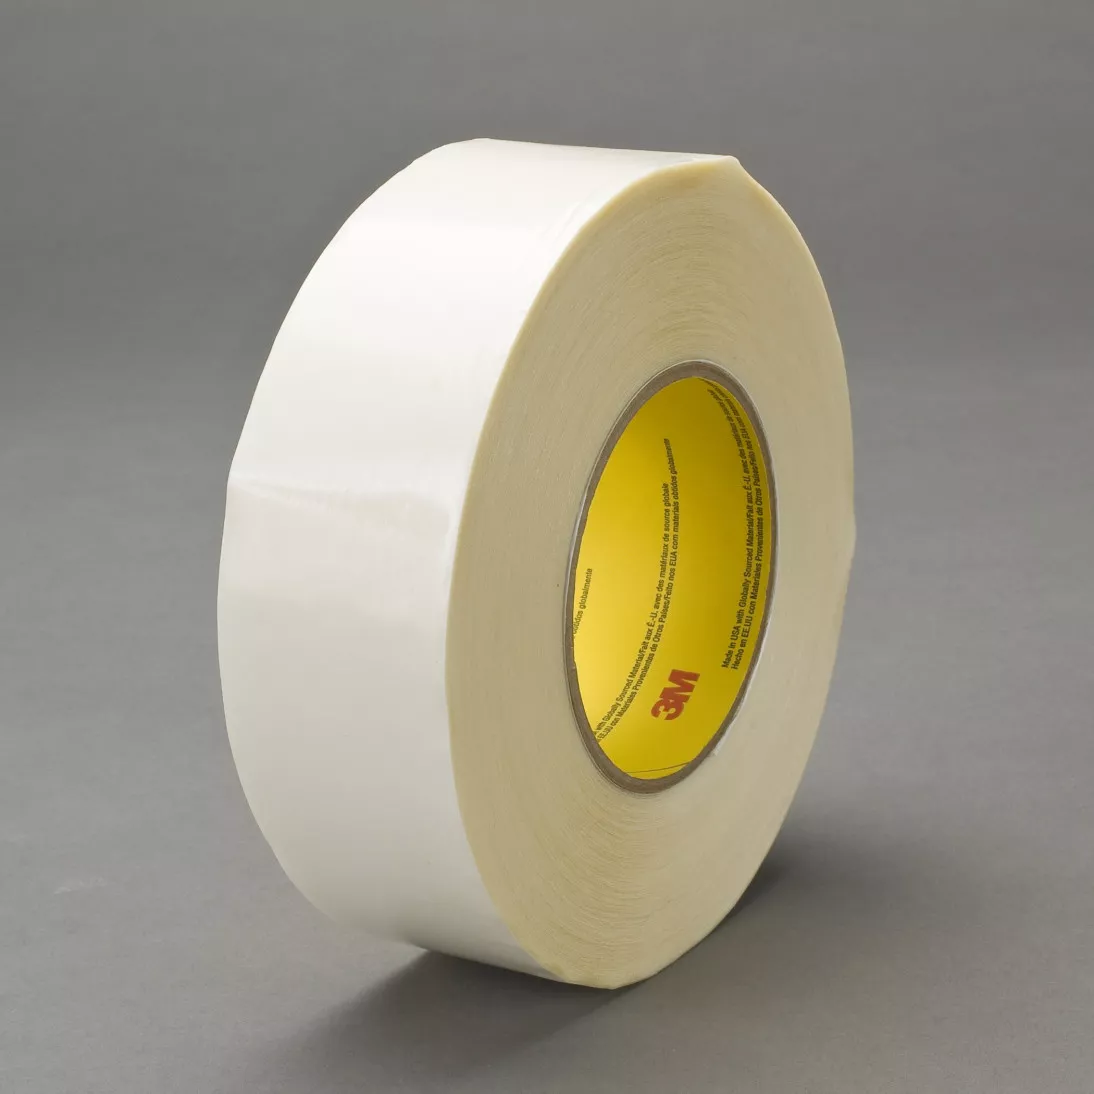 3M™ Double Coated Tape 9741, Clear, 99 mm x 55 m, 6.5 mil, 12 rolls per
case